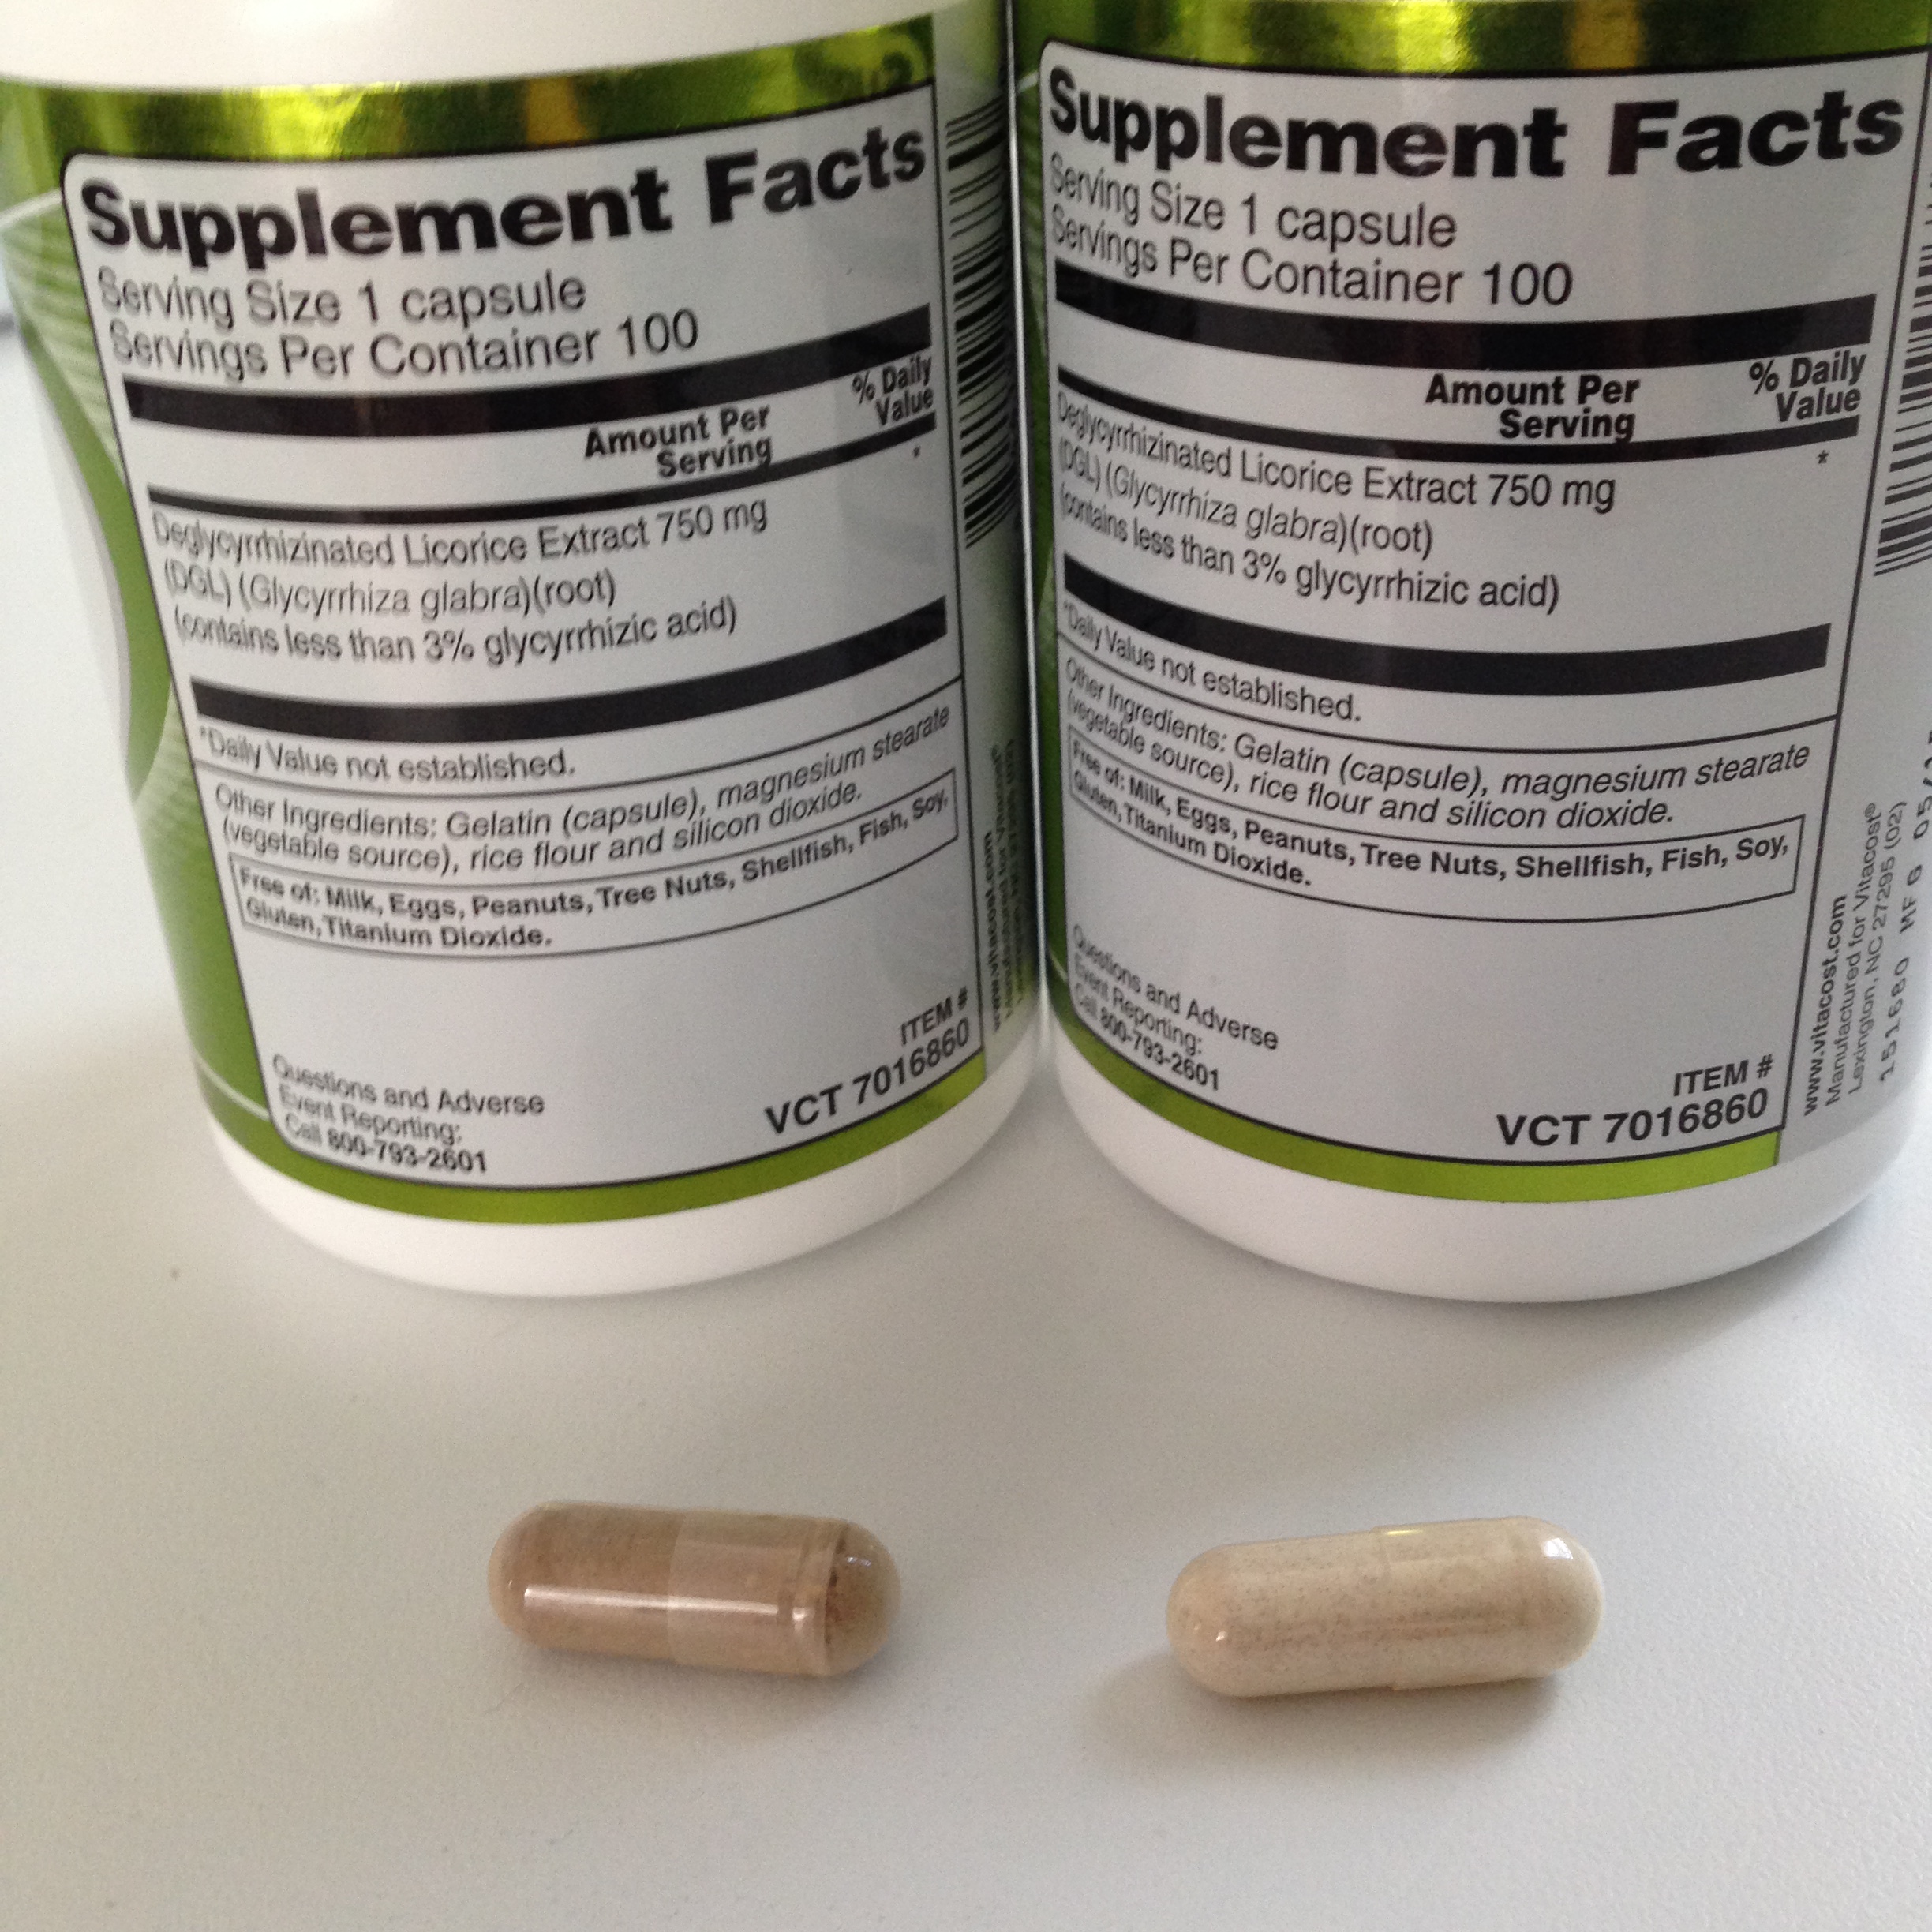 Left: old capsule and bottle
Right: new, diluted capsule, with same milligrams labeled on bottle